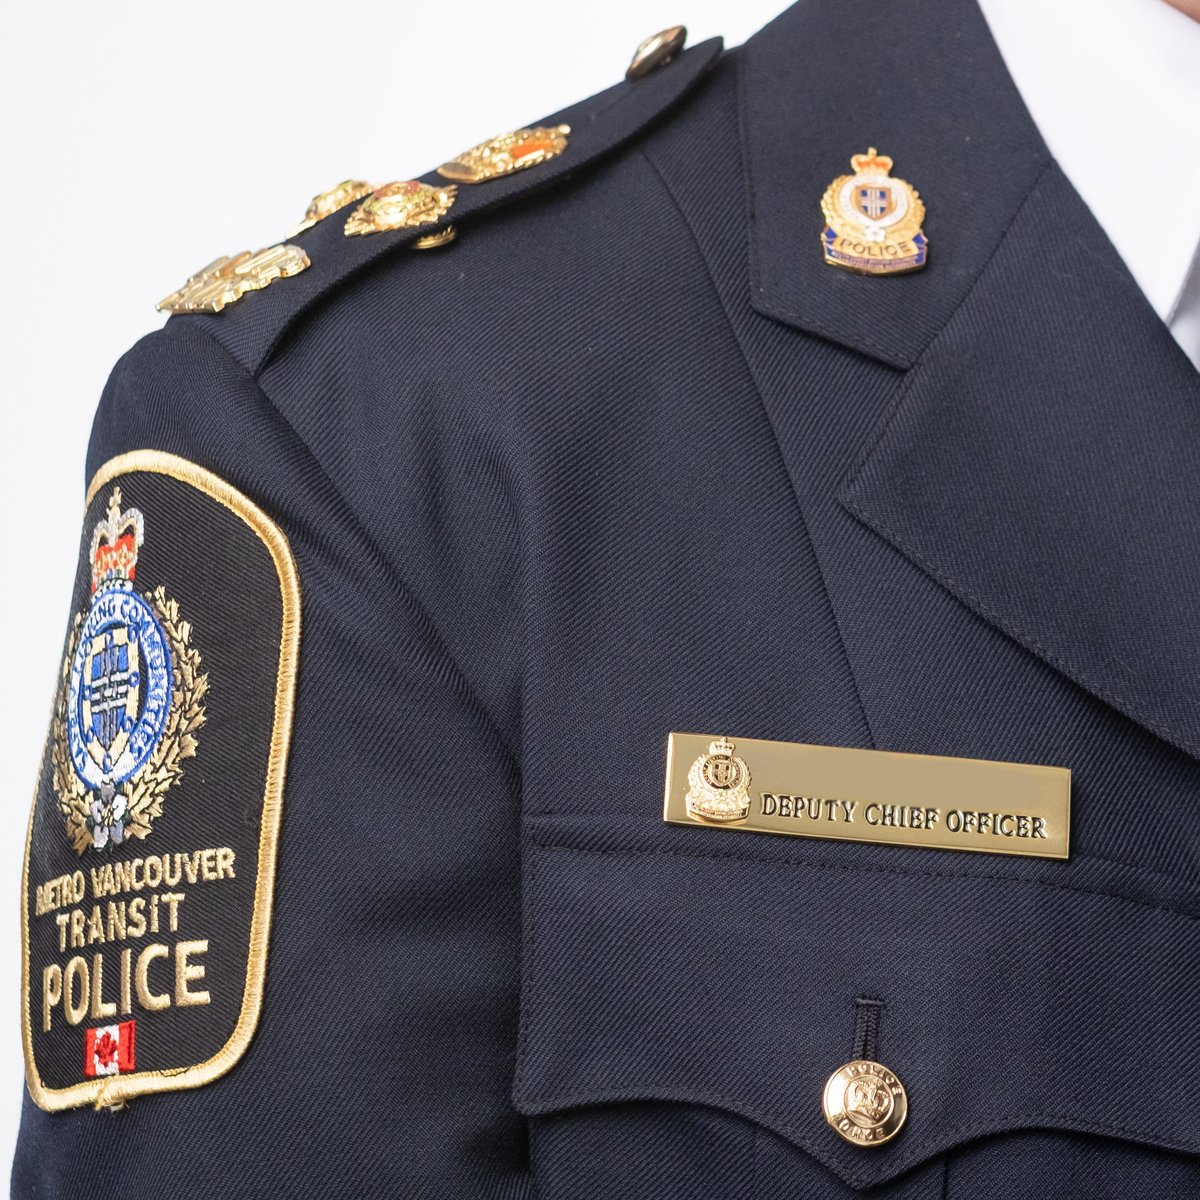 #WeAreHiring Transit Police is seeking a Deputy Chief Officer to guide our department as we head into a time of rapid growth and expansion. Learn more: transitpolice.ca/transit-police…